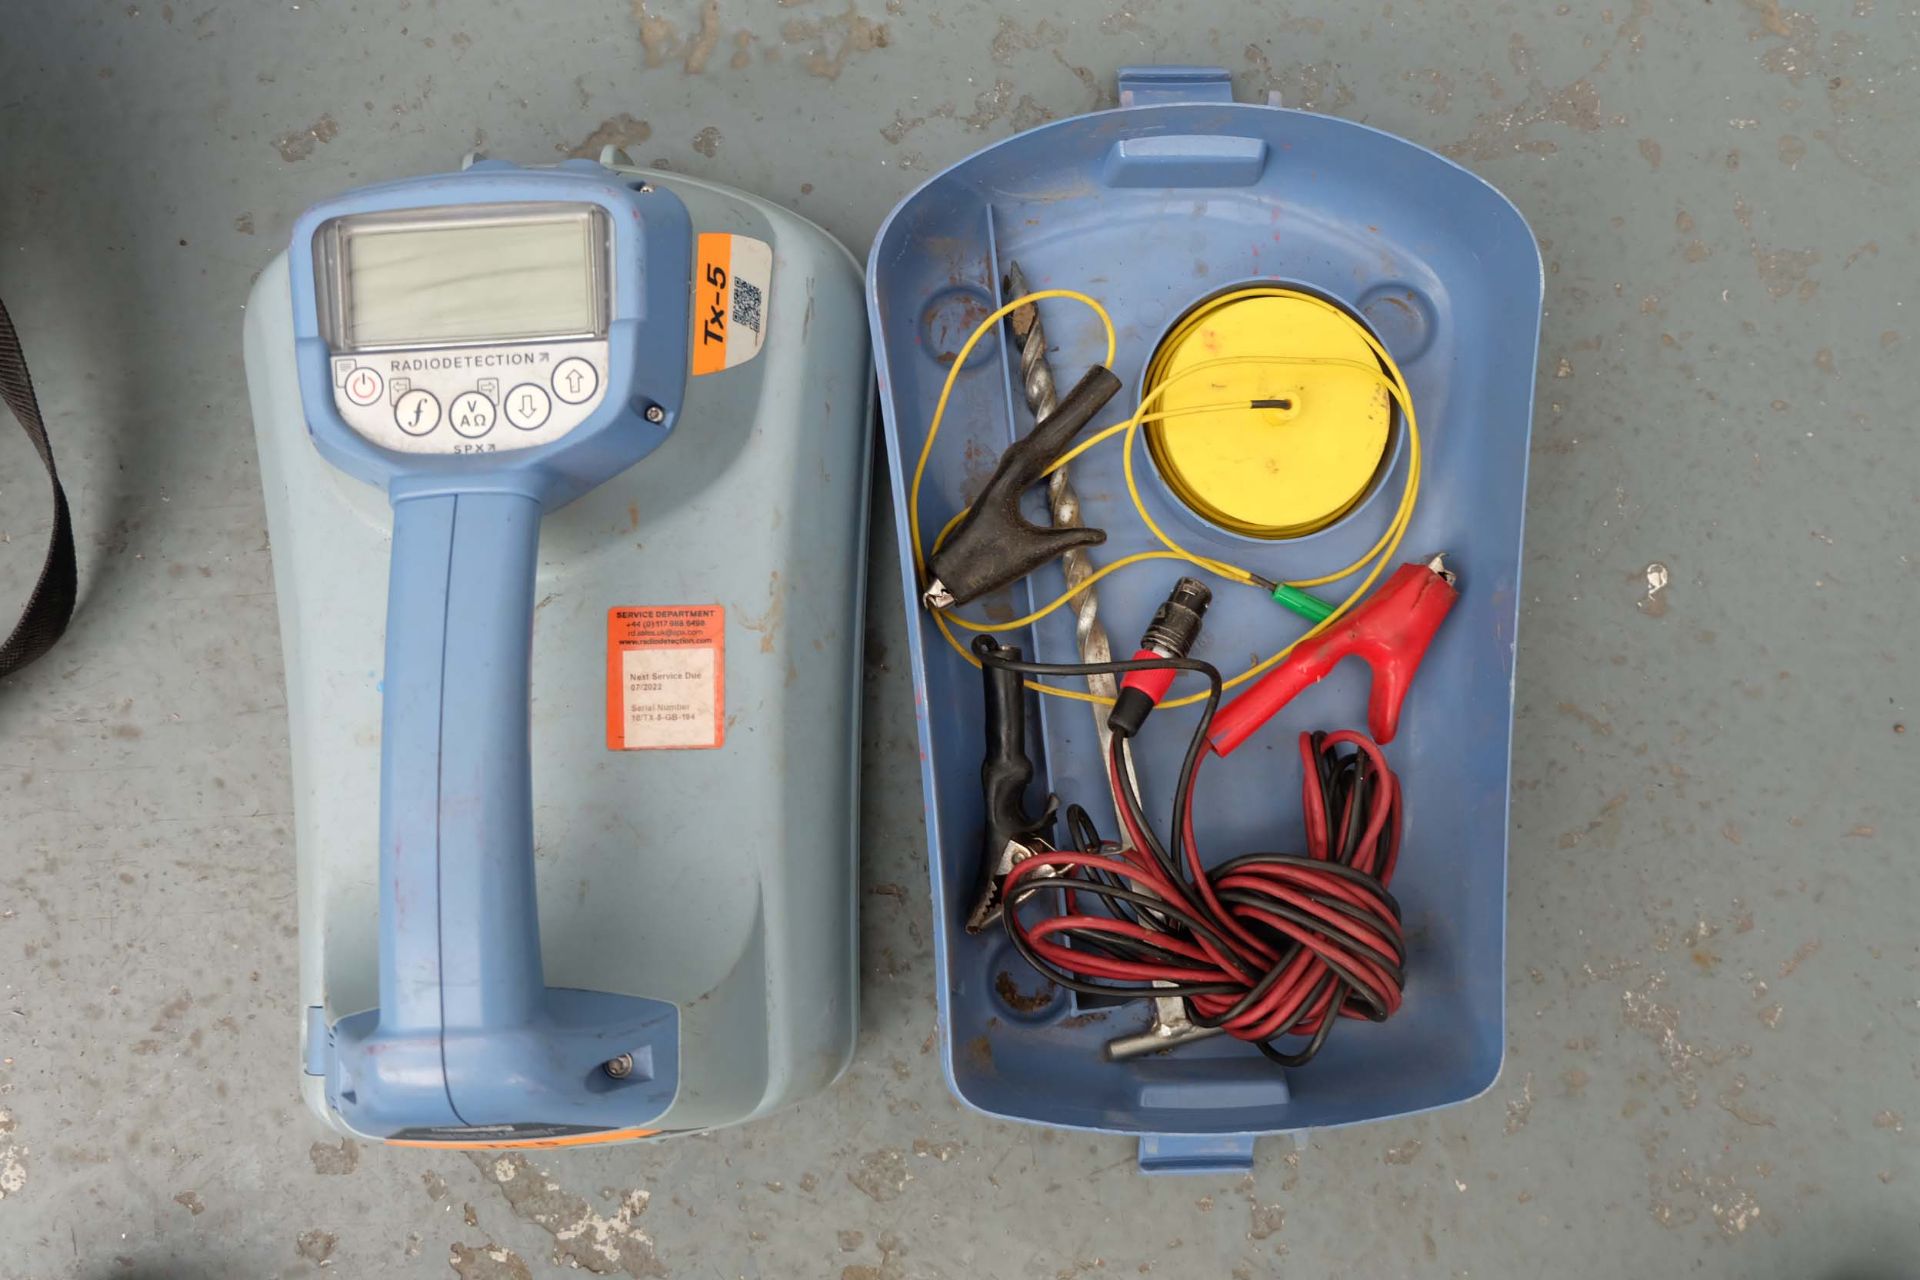 Radiodetection Model RD7200 Multifunction Precision Cable & Pipe Locator. - Image 11 of 13